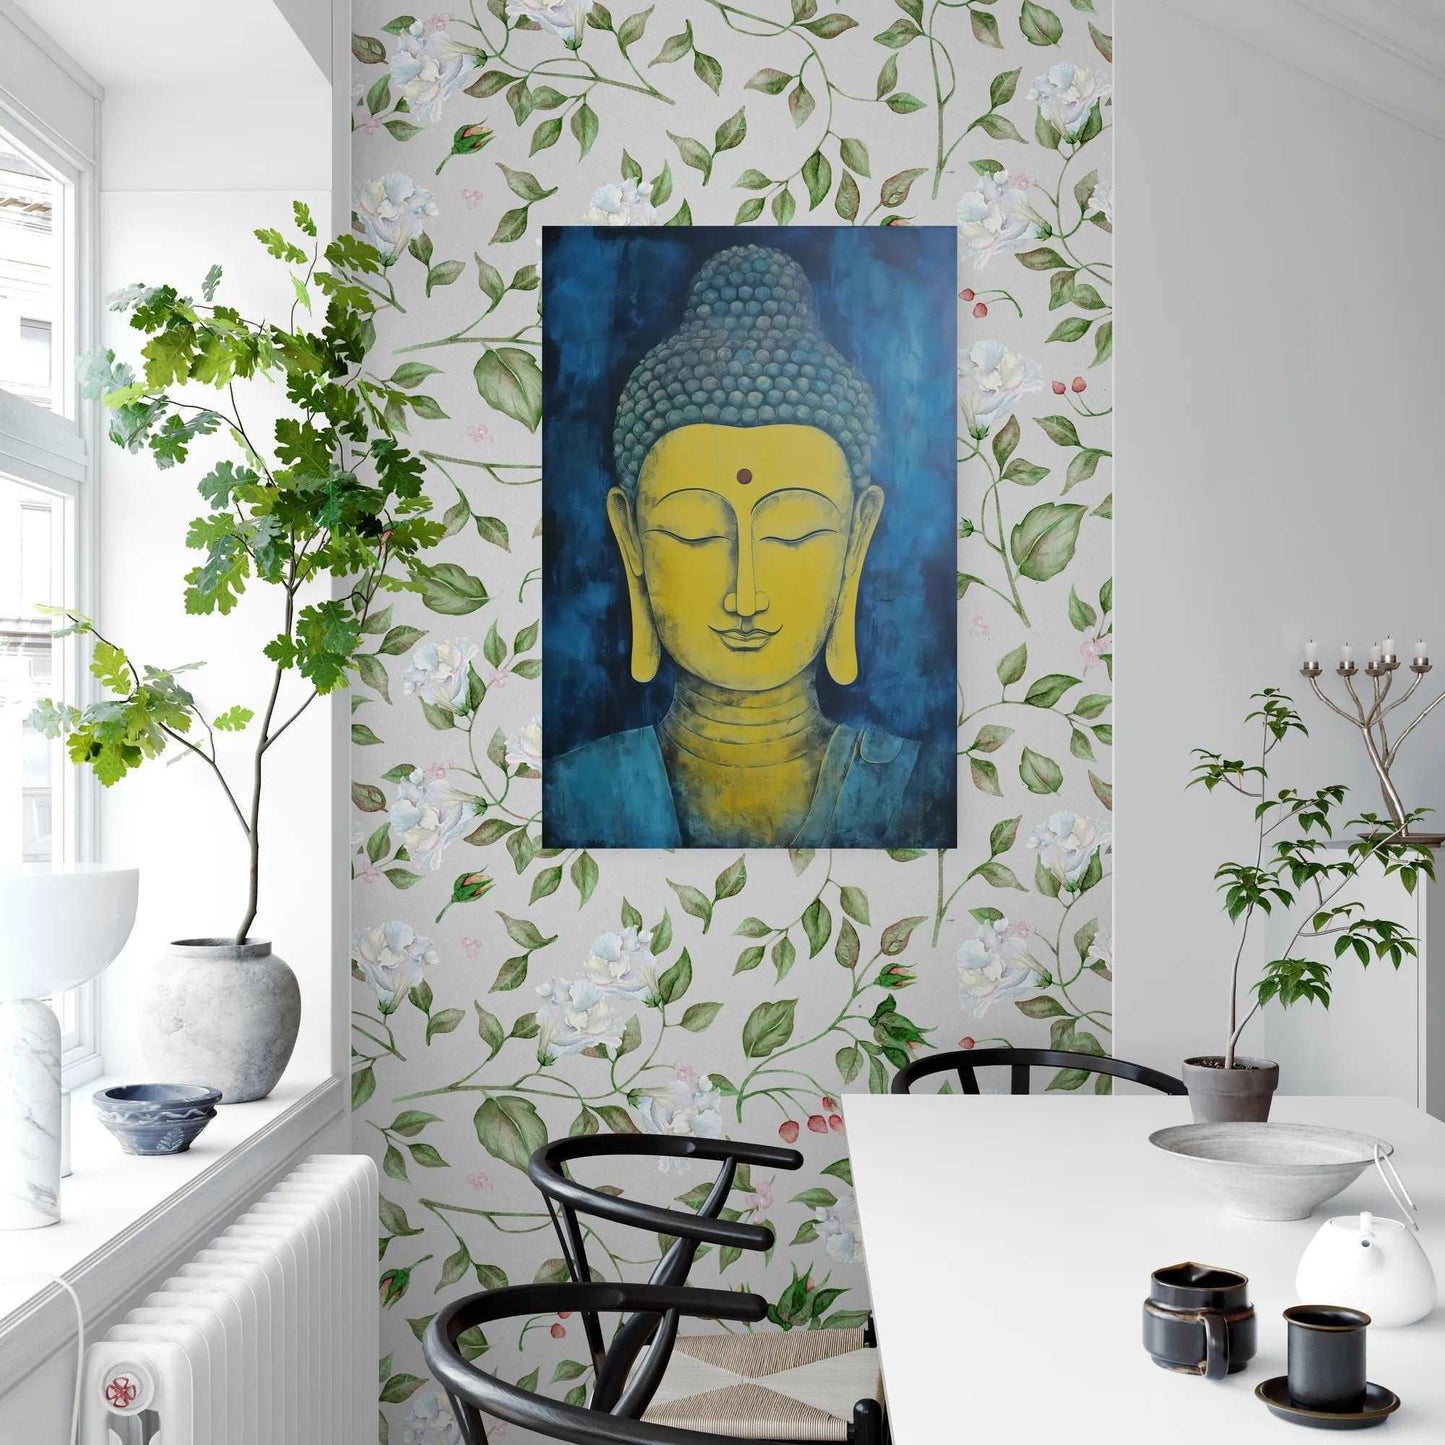 Peaceful dining corner with a green plant on a white sill, floral wallpaper, and a blue and gold Buddha head painting on the wall.